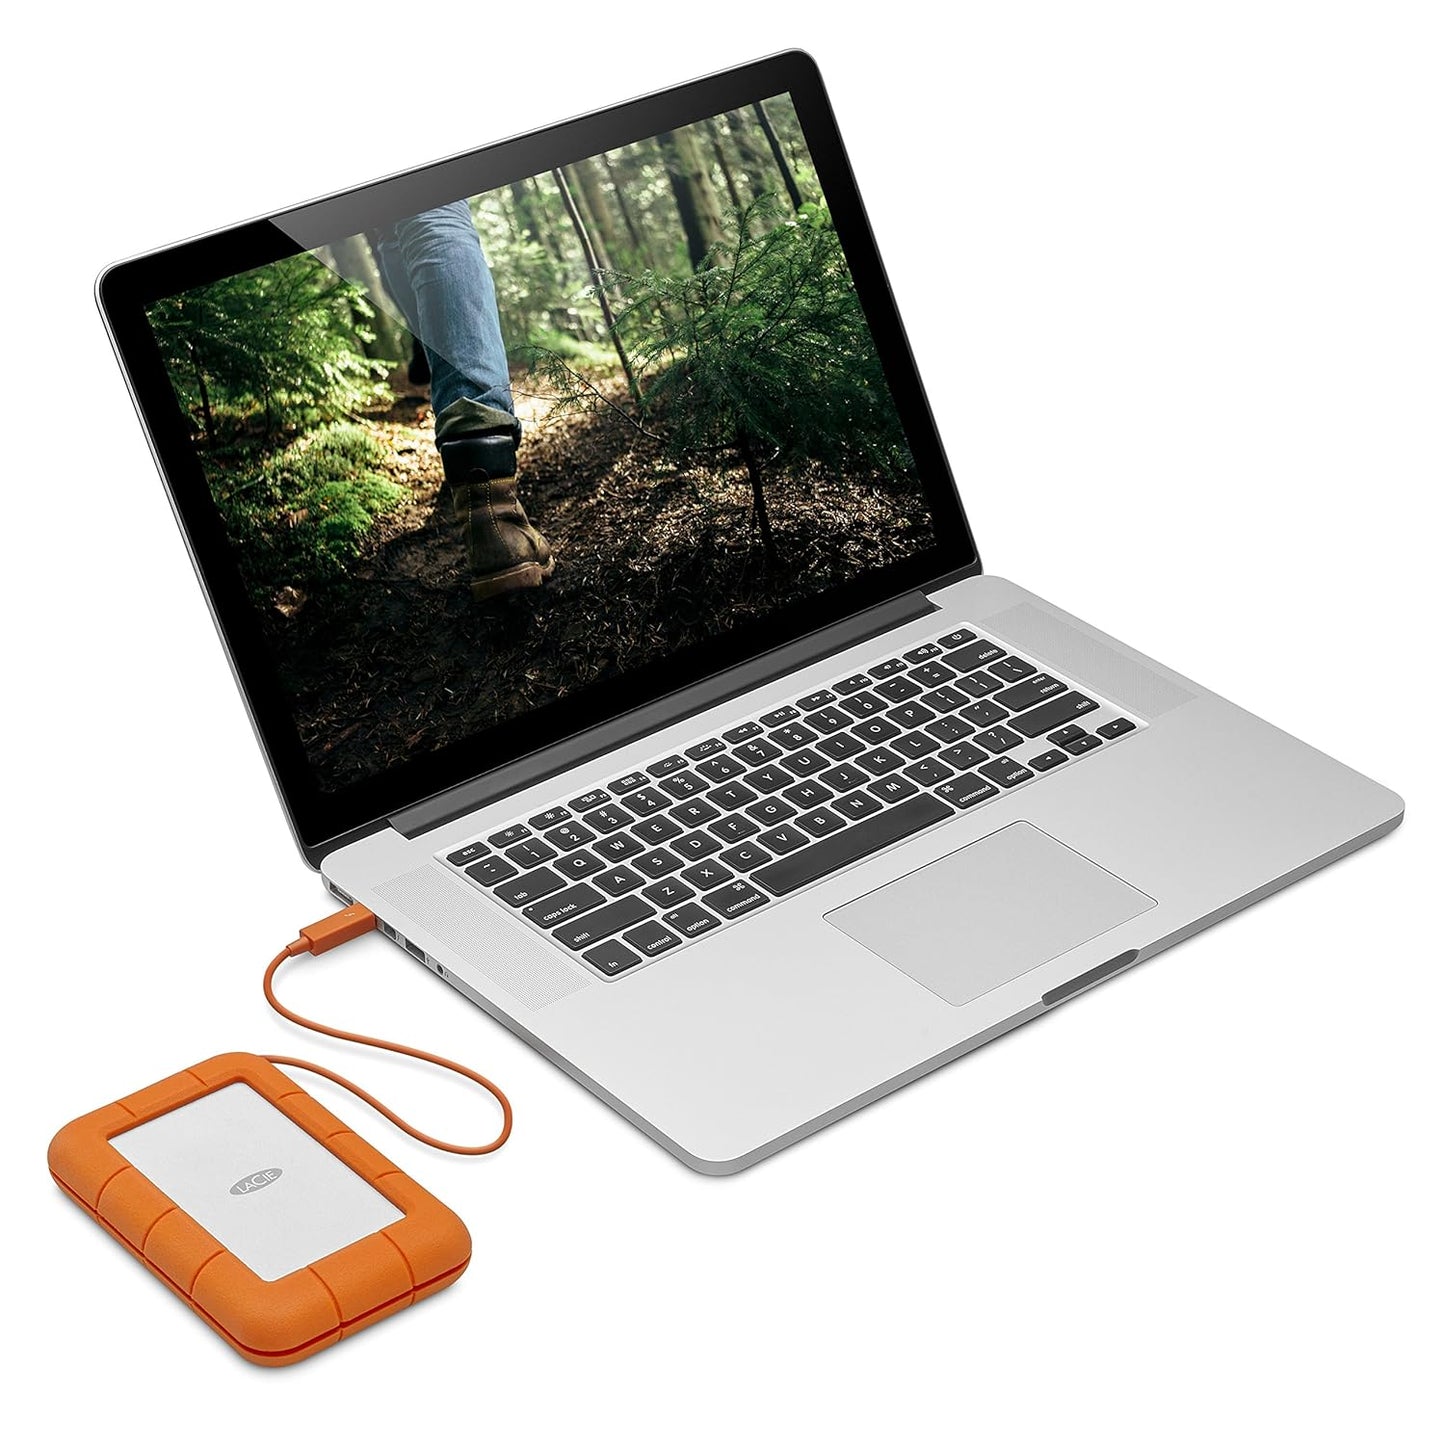 LaCie Rugged USB-C 4TB Portable External Hard Drive with 2-Year Data Recovery Service